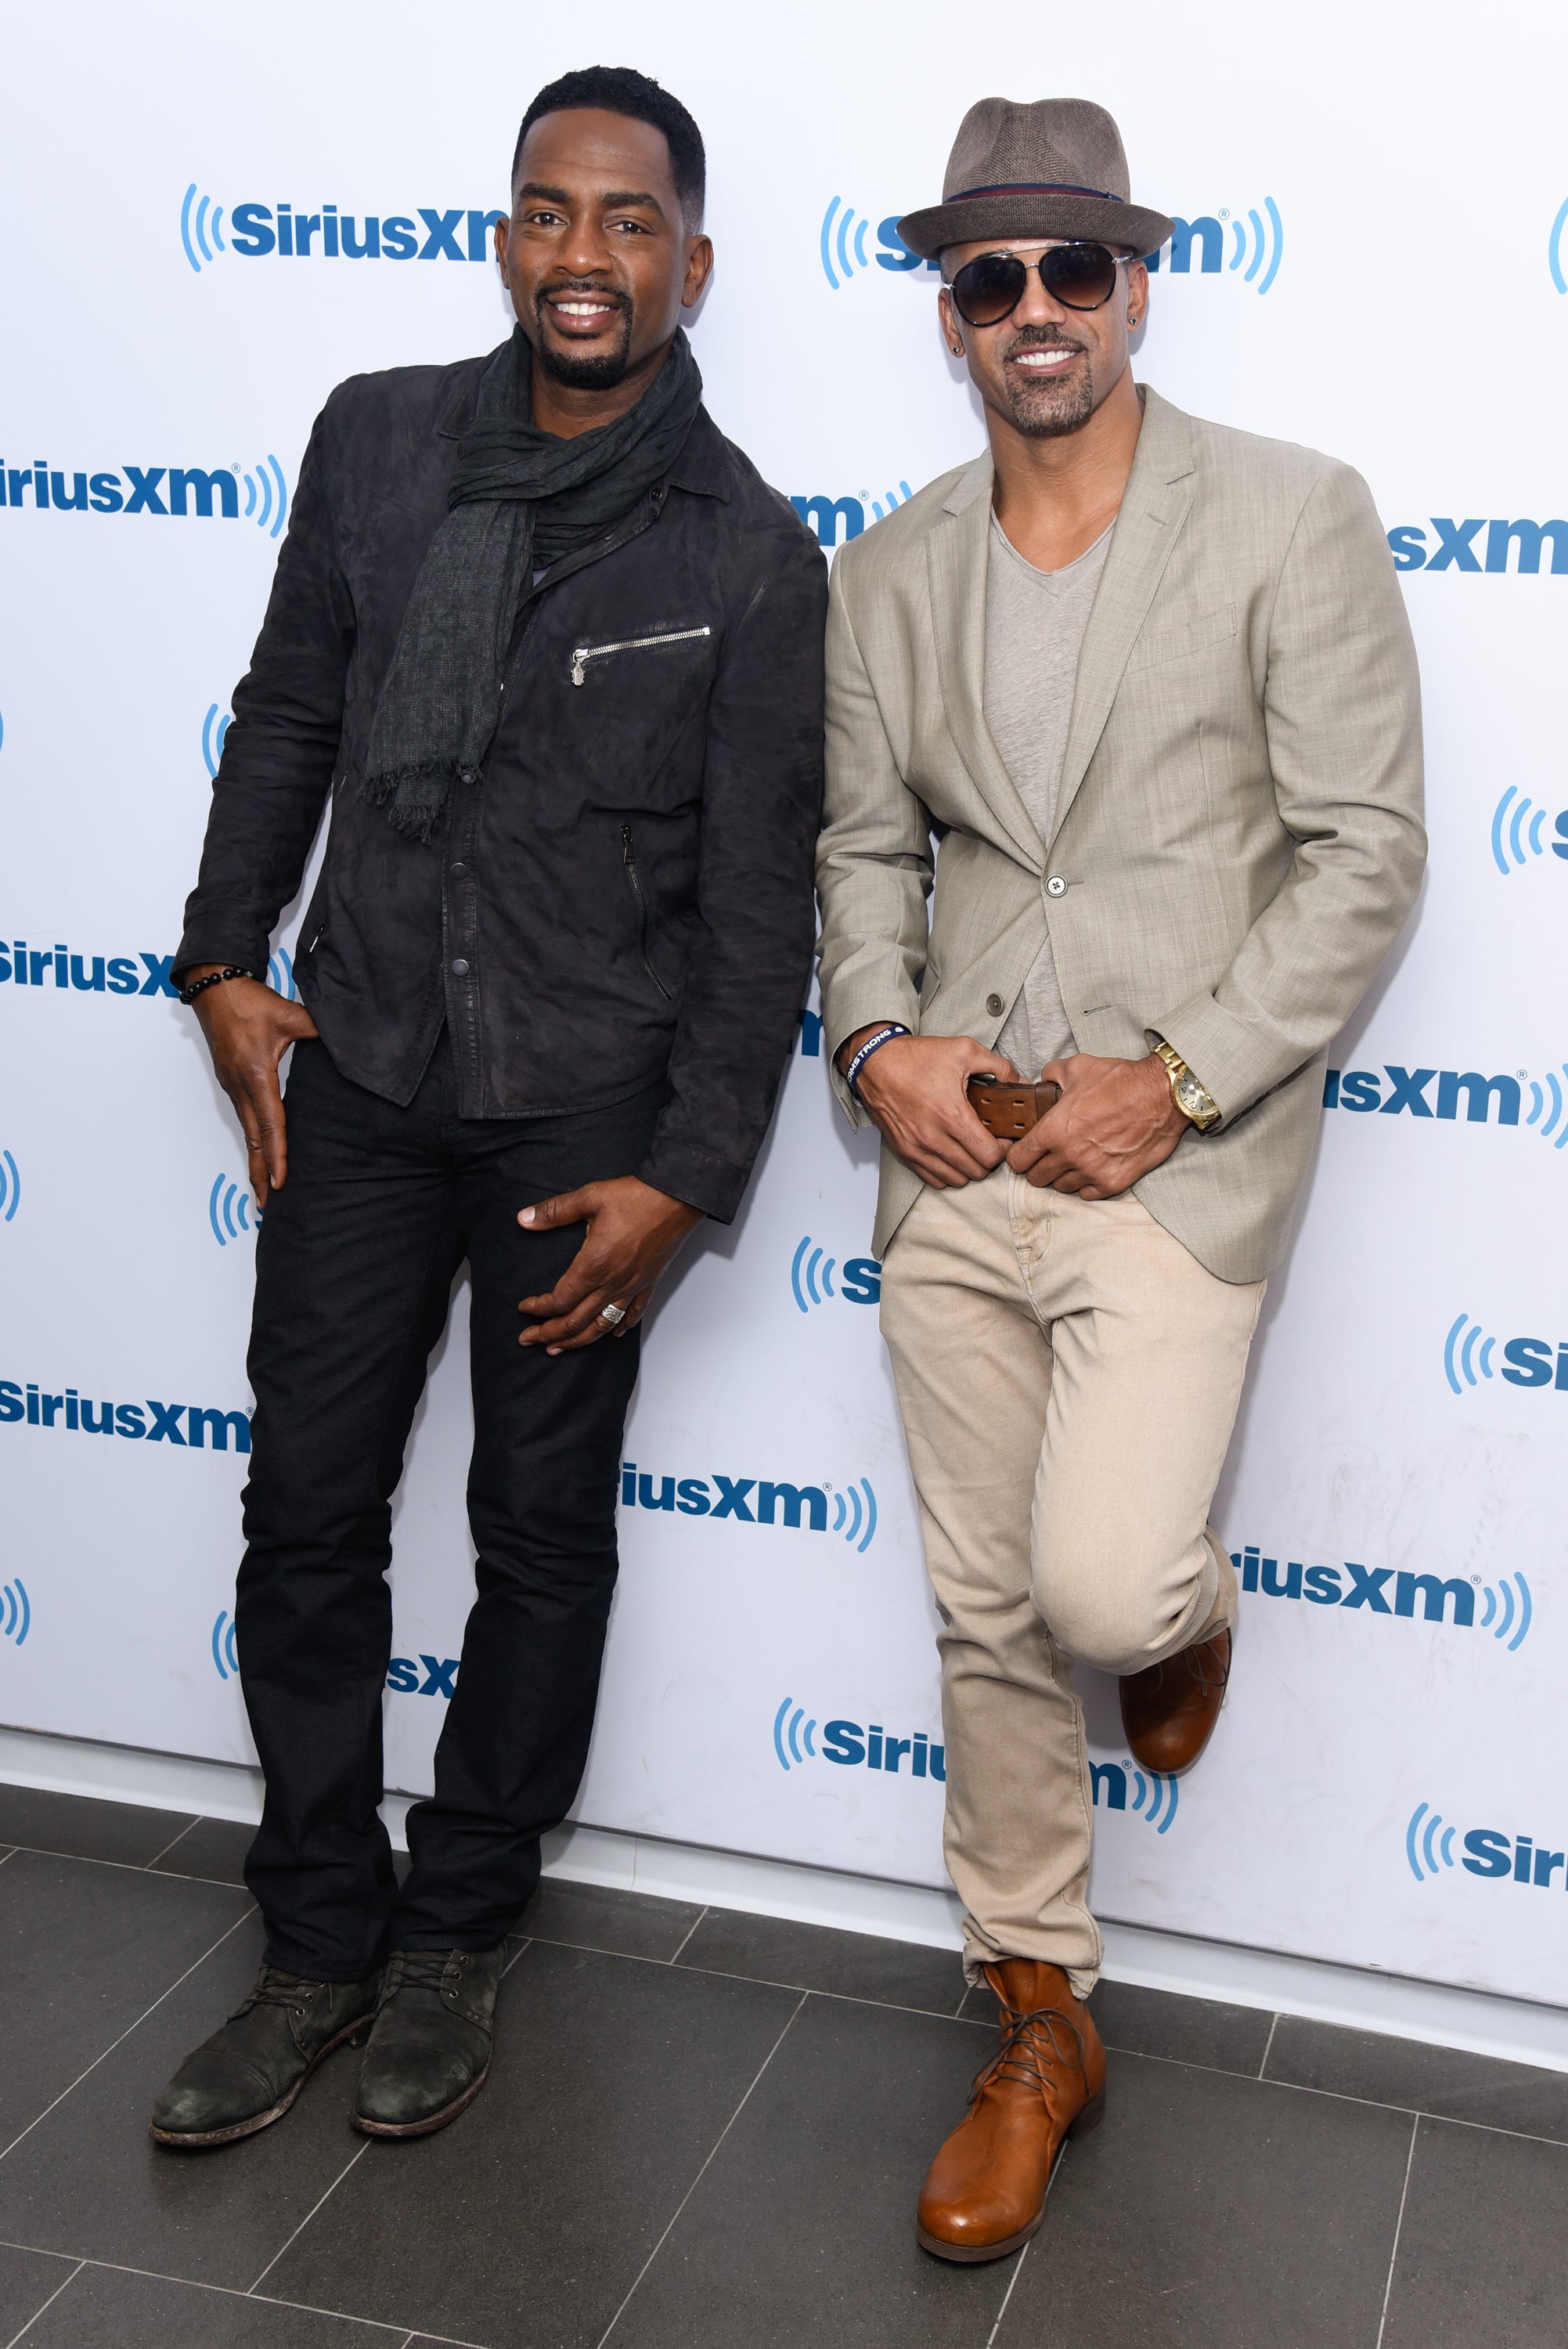 Hollywoods Best Bromance: Shemar Moore Praises Long-Time Friend Bill Bellamy And Dishes On 'The Brothers 2'
